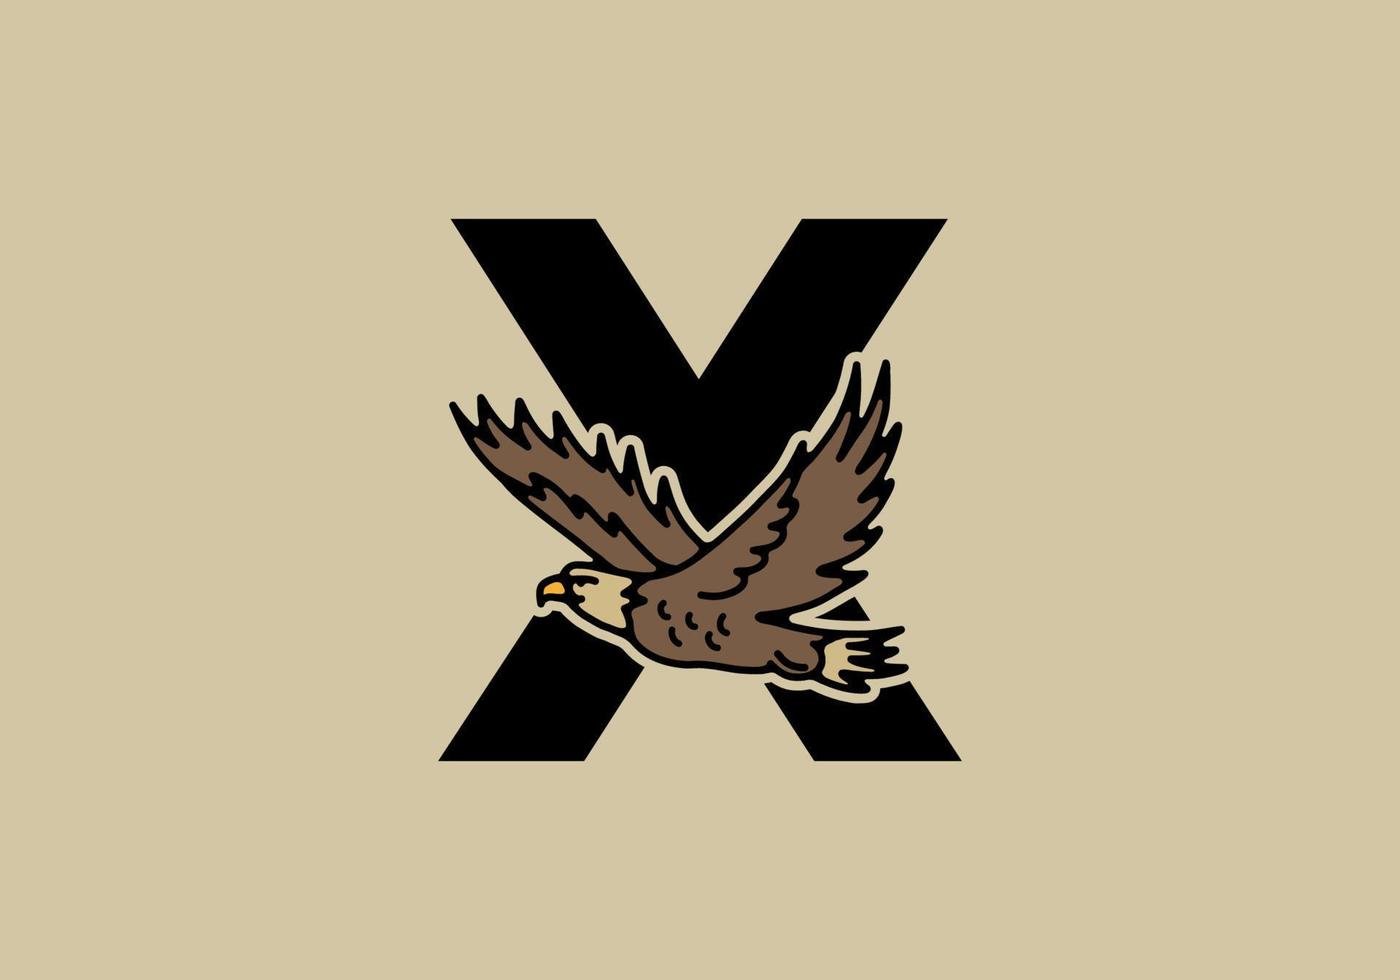 Line art illustration of flying eagle with X initial letter vector